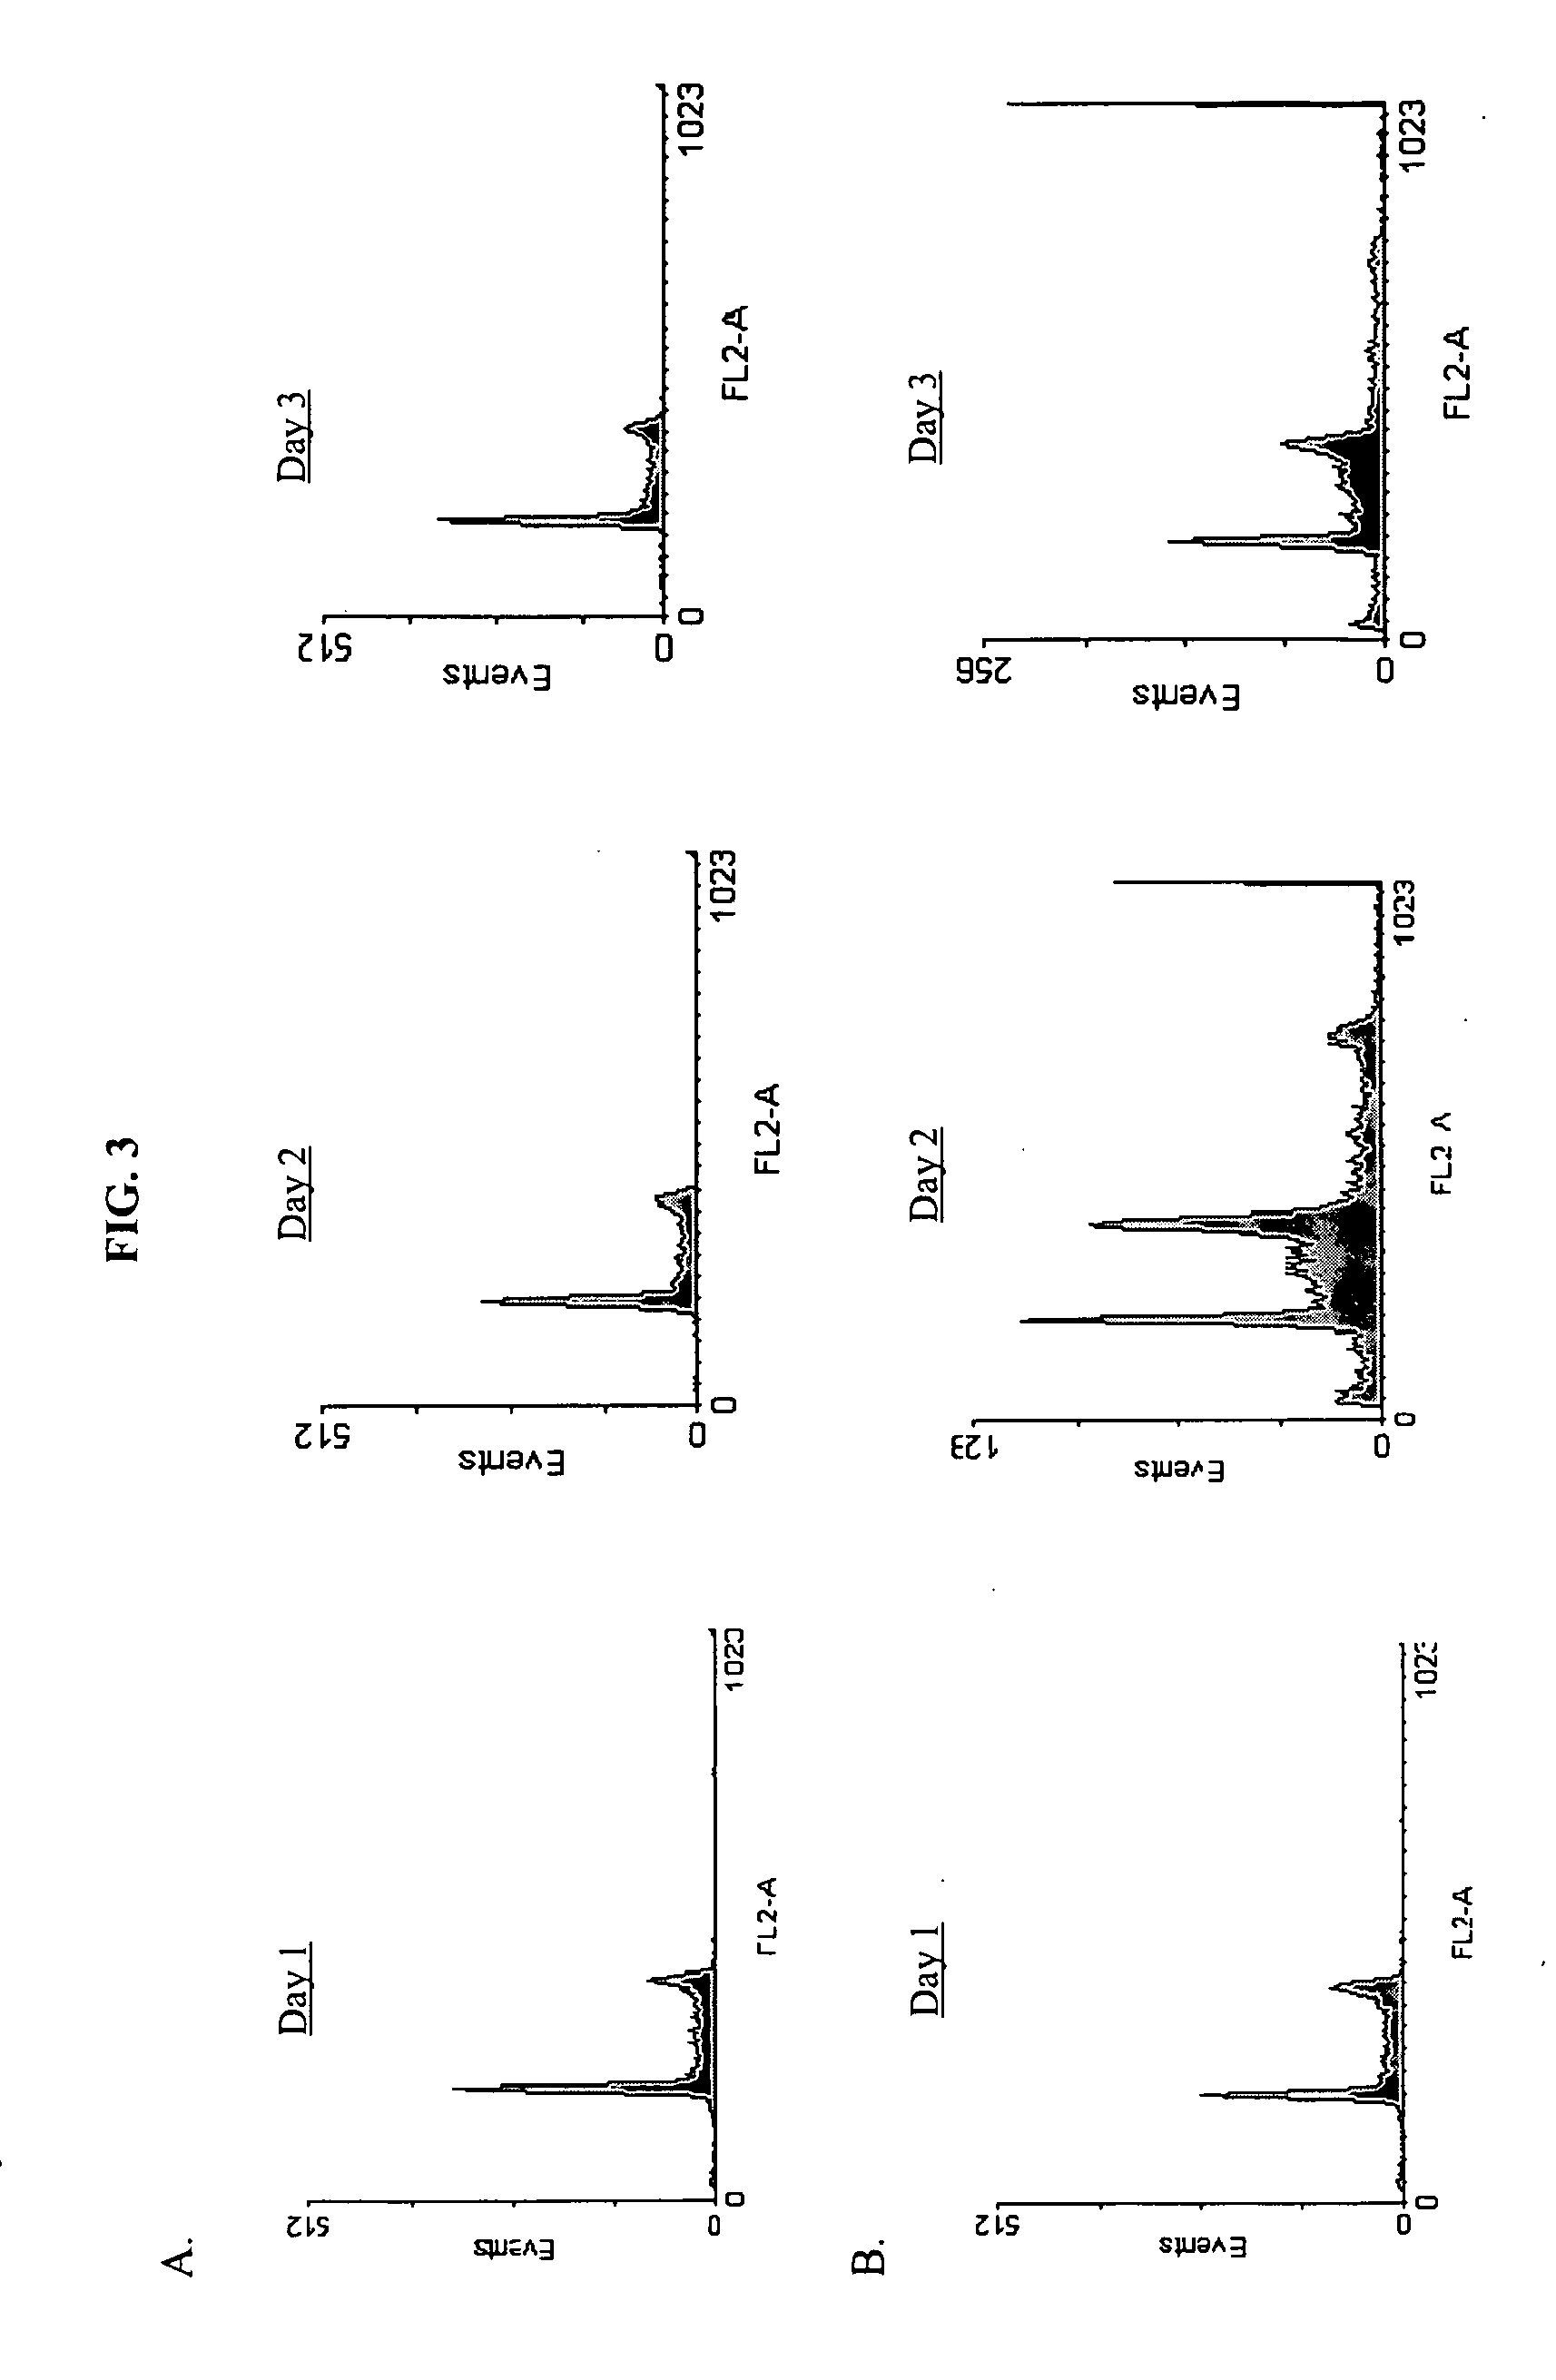 Method for inhibiting tumor growth with dehydrosulphurenic acid extracted from antrodia cinnamomea